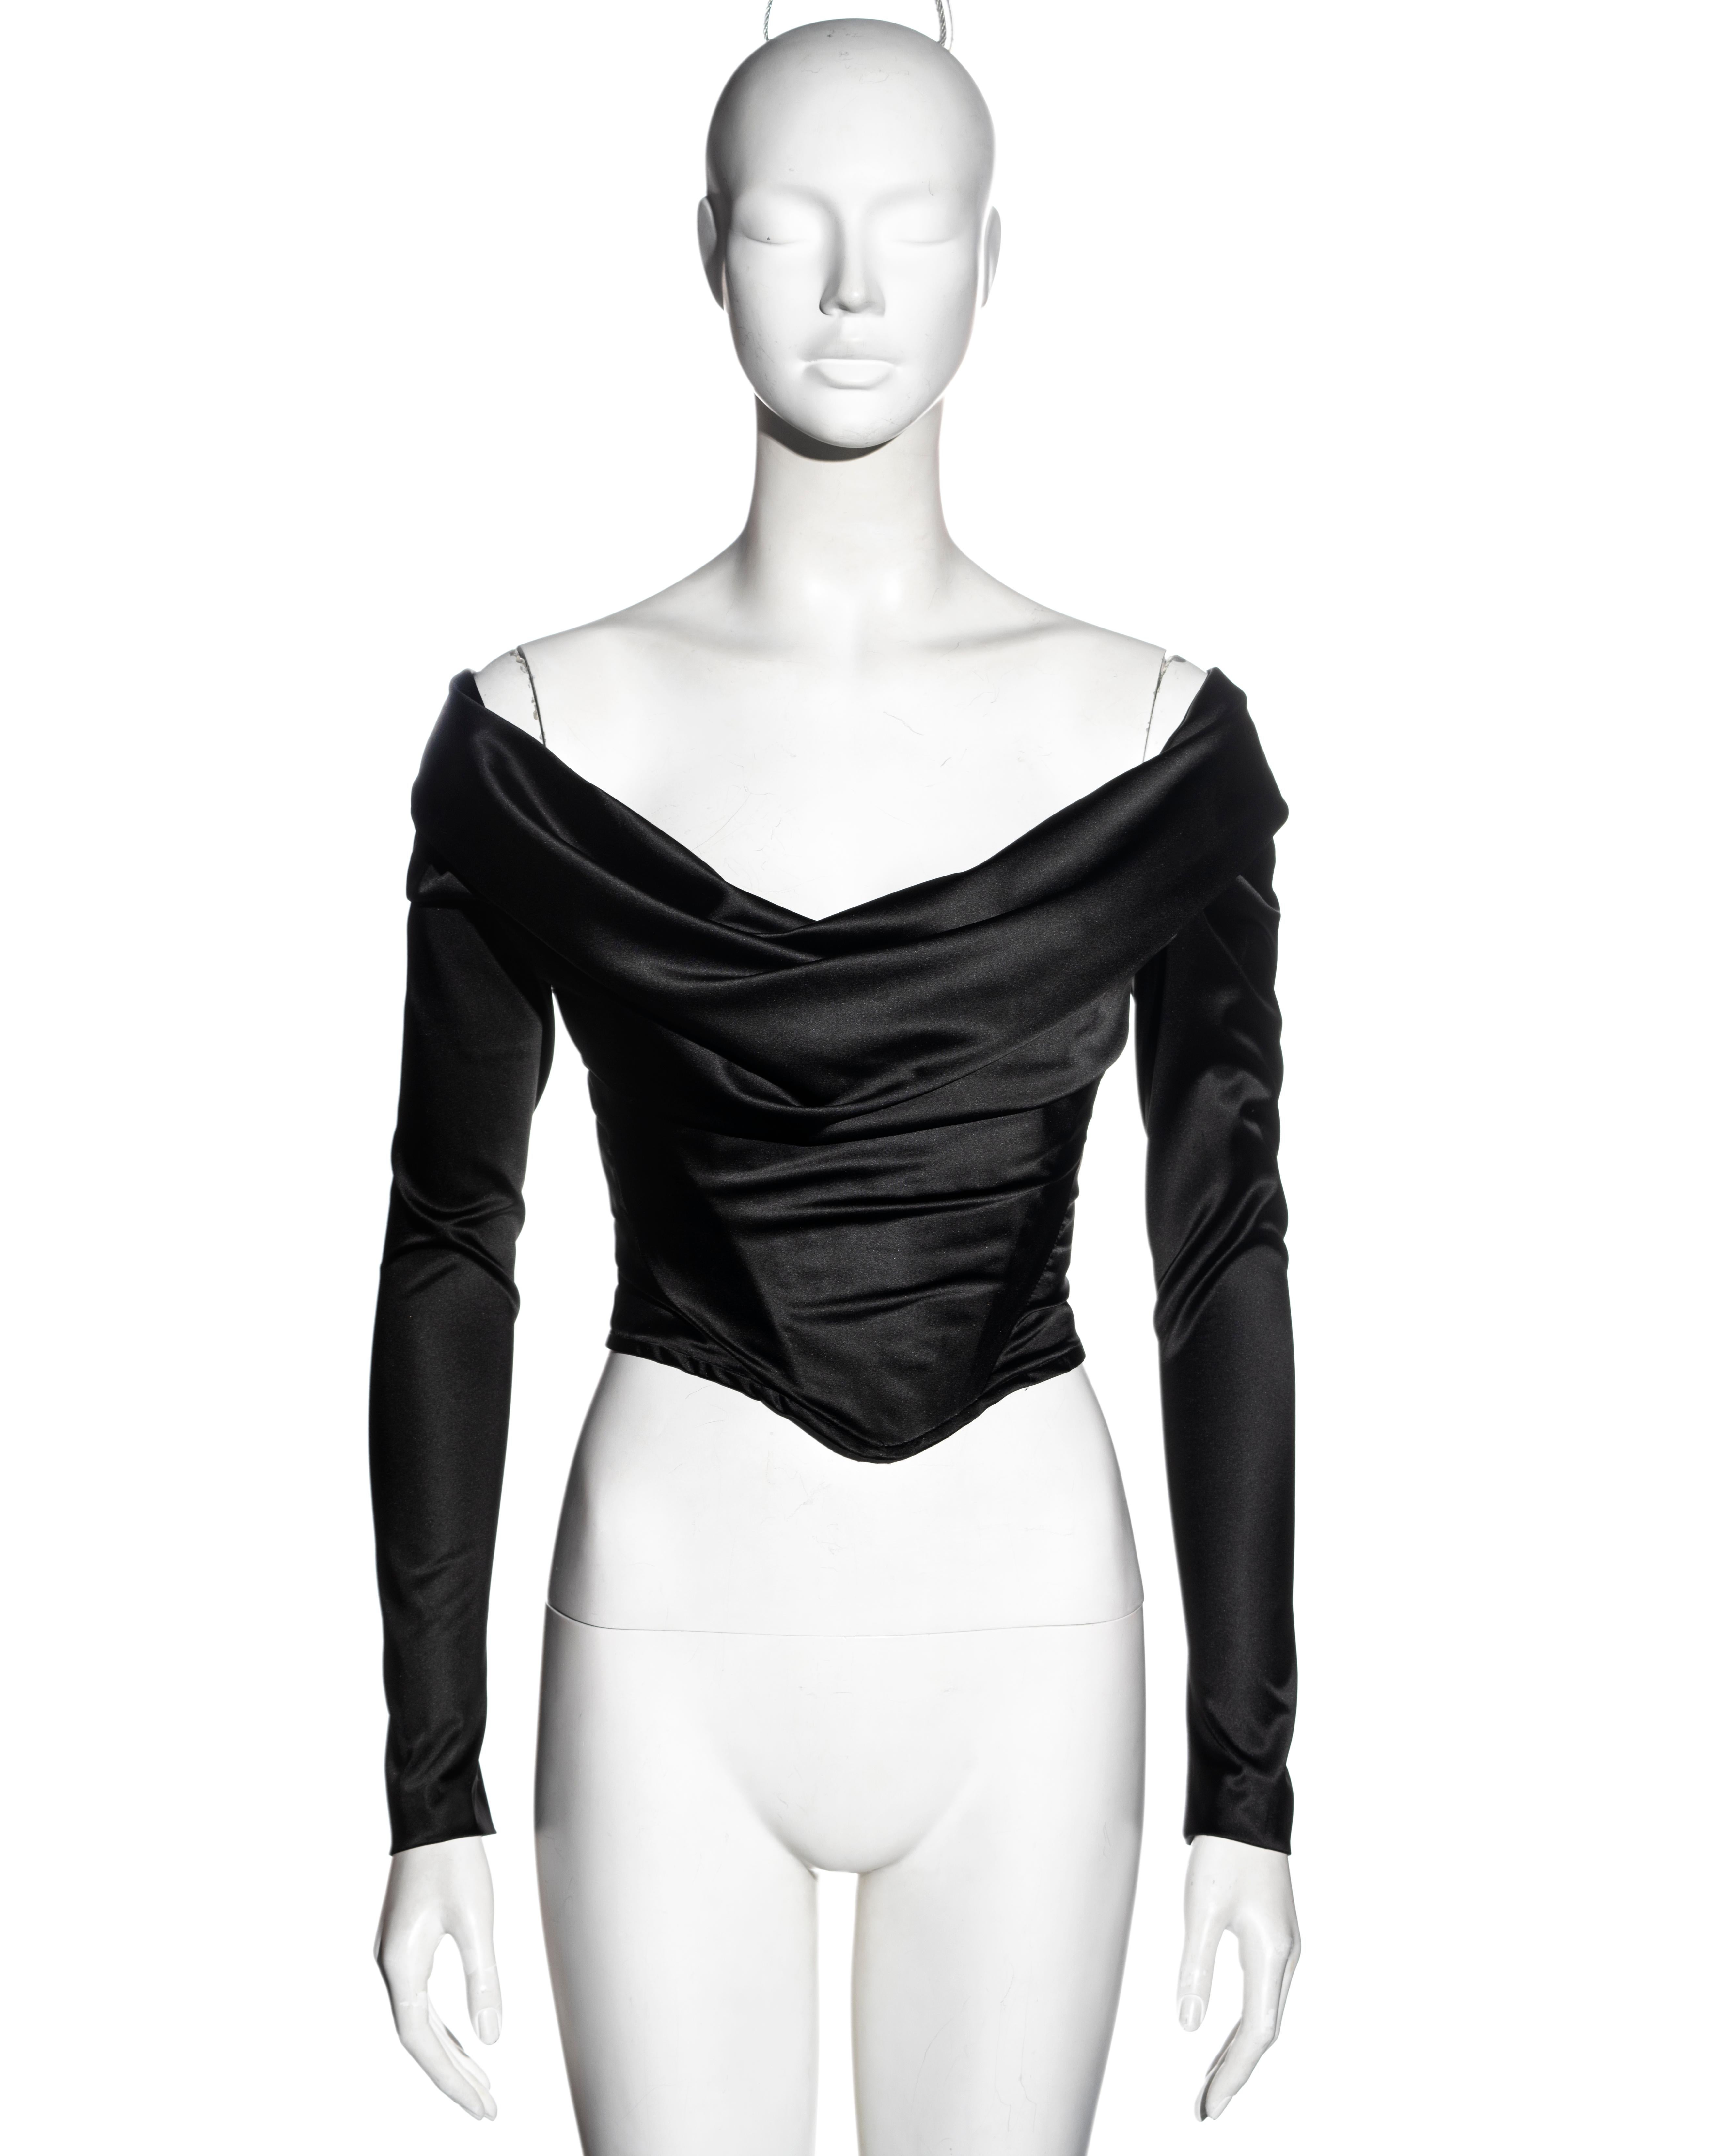 ▪ Vivienne Westwood black satin corset top
▪ Off-shoulder
▪ Cowl neck
▪ Long fitted sleeves 
▪ Zipper at center-back
▪ UK 10 - US 6
▪ Fall-Winter 1997
▪ 92% Polyester, 8% Spandex 
▪ Made in Italy